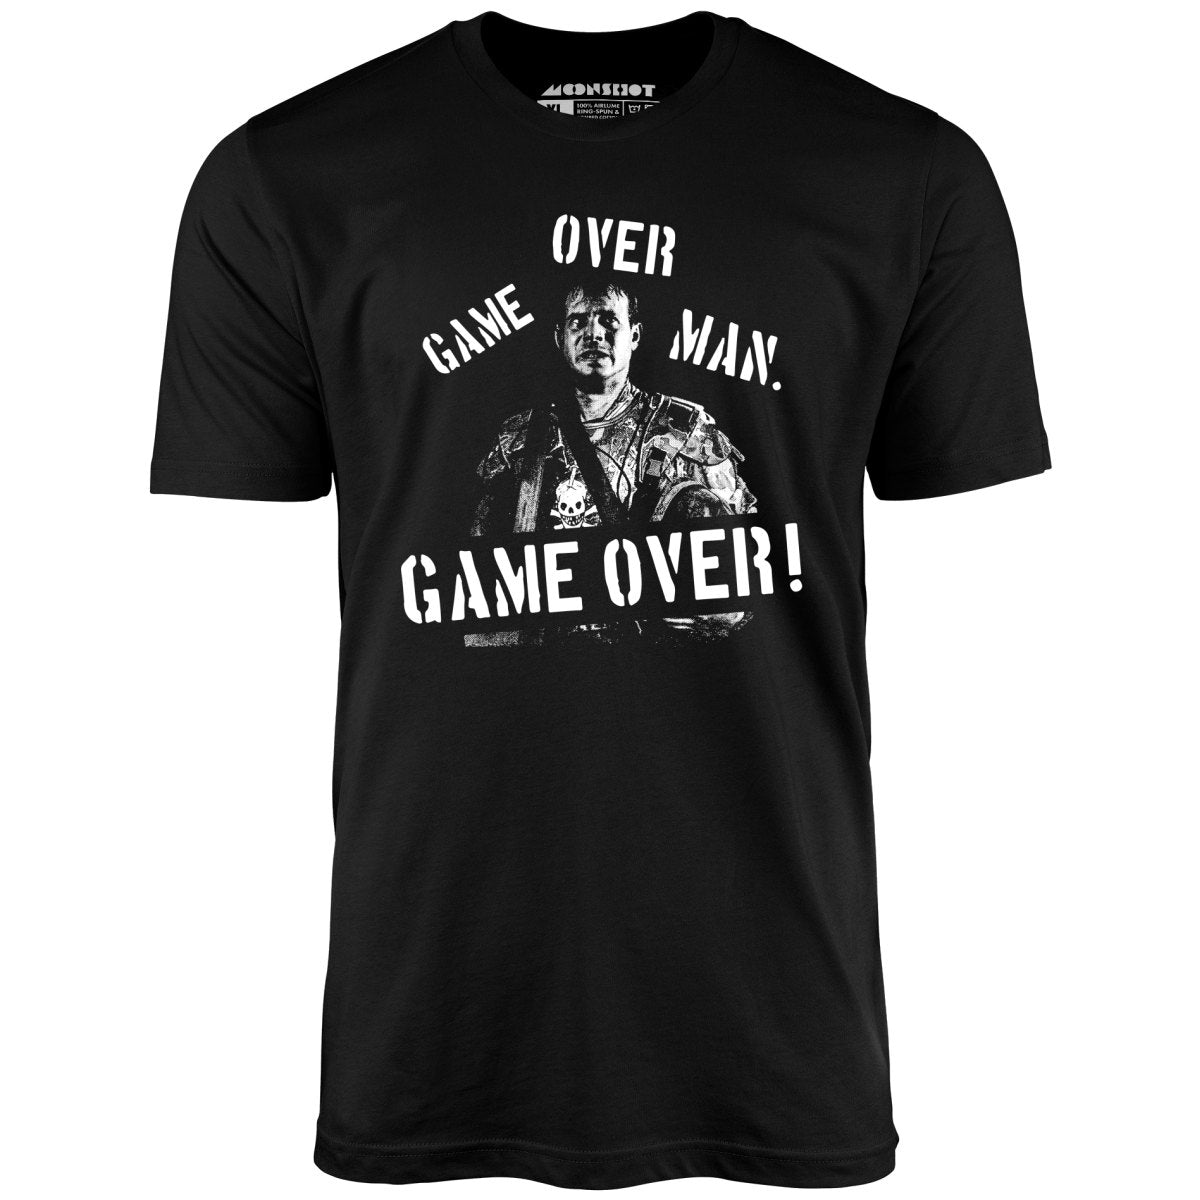 Game Over, Man Game Over! - Unisex T-Shirt